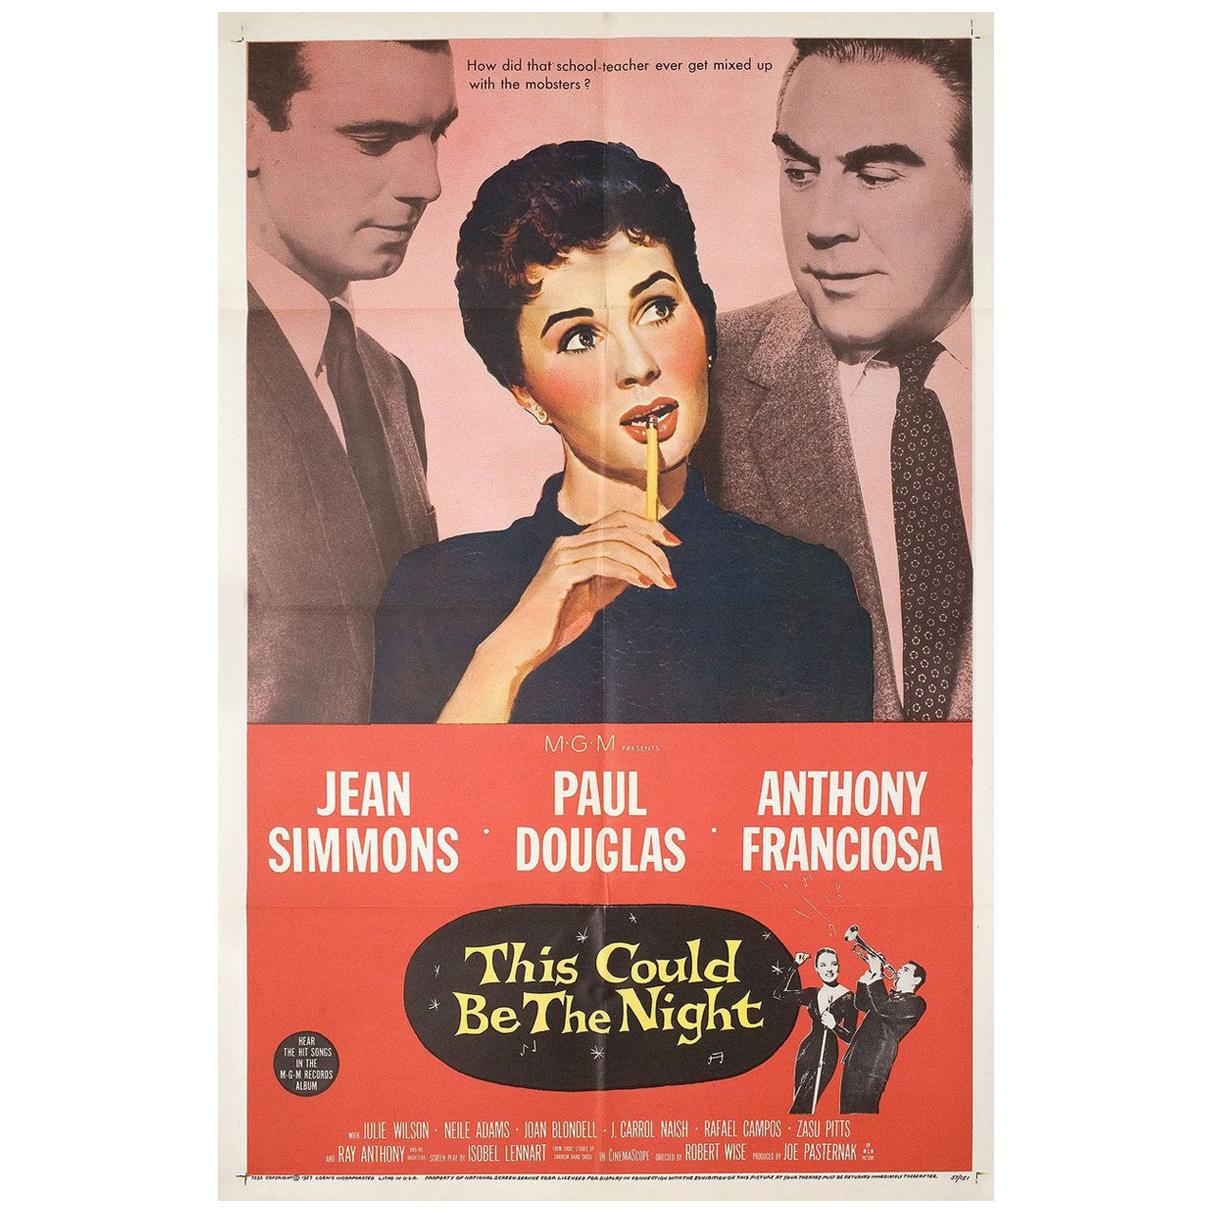 This Could Be the Night 1957 U.S. One Sheet Film Poster